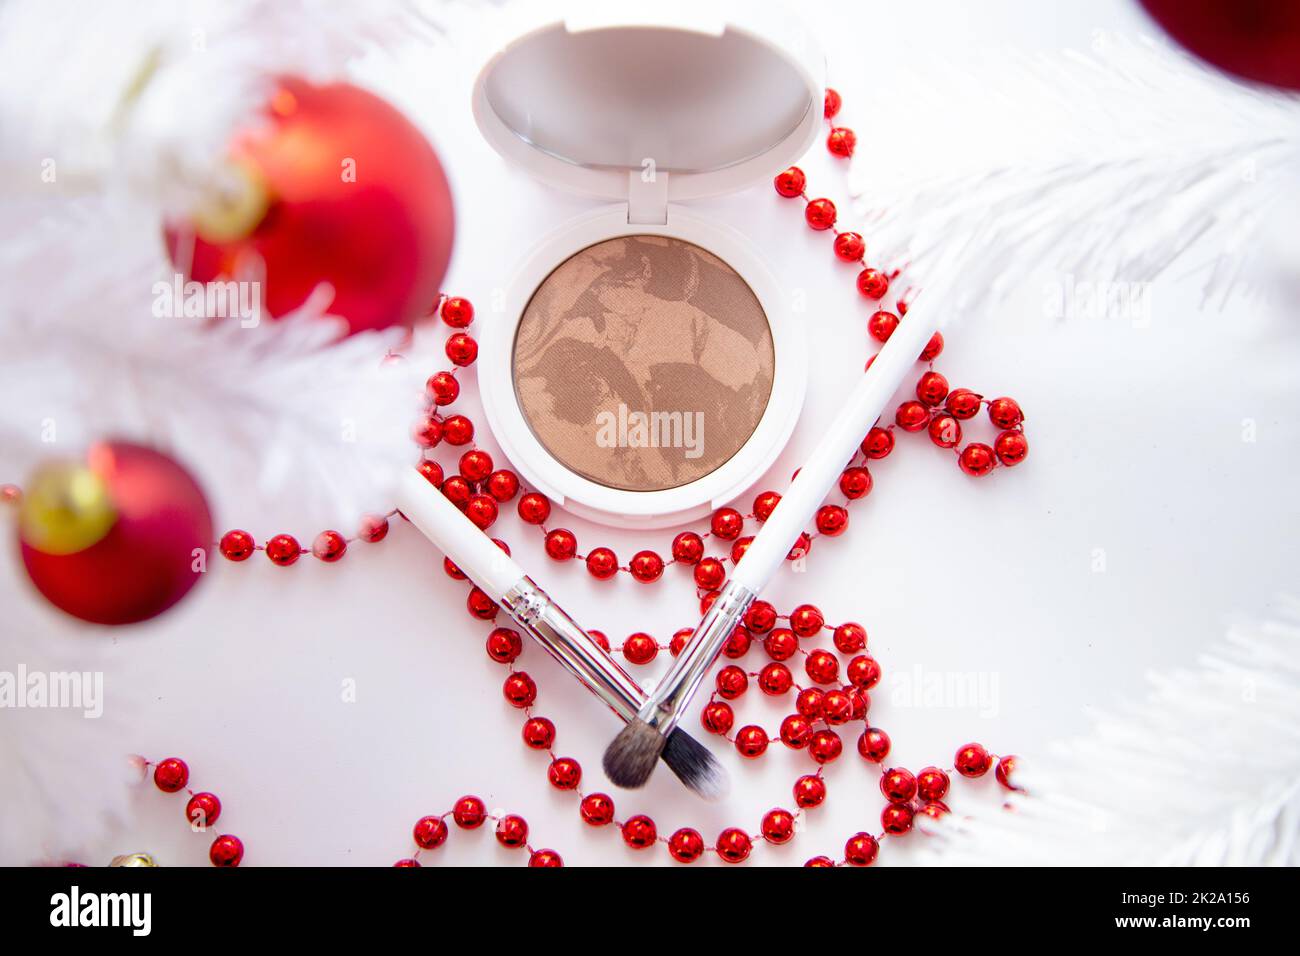 A white pillow with powder and bronzer lies on a white background among a white fluffy Christmas tree with red toys, thin makeup brushes and bright red beads lie in front. Stock Photo